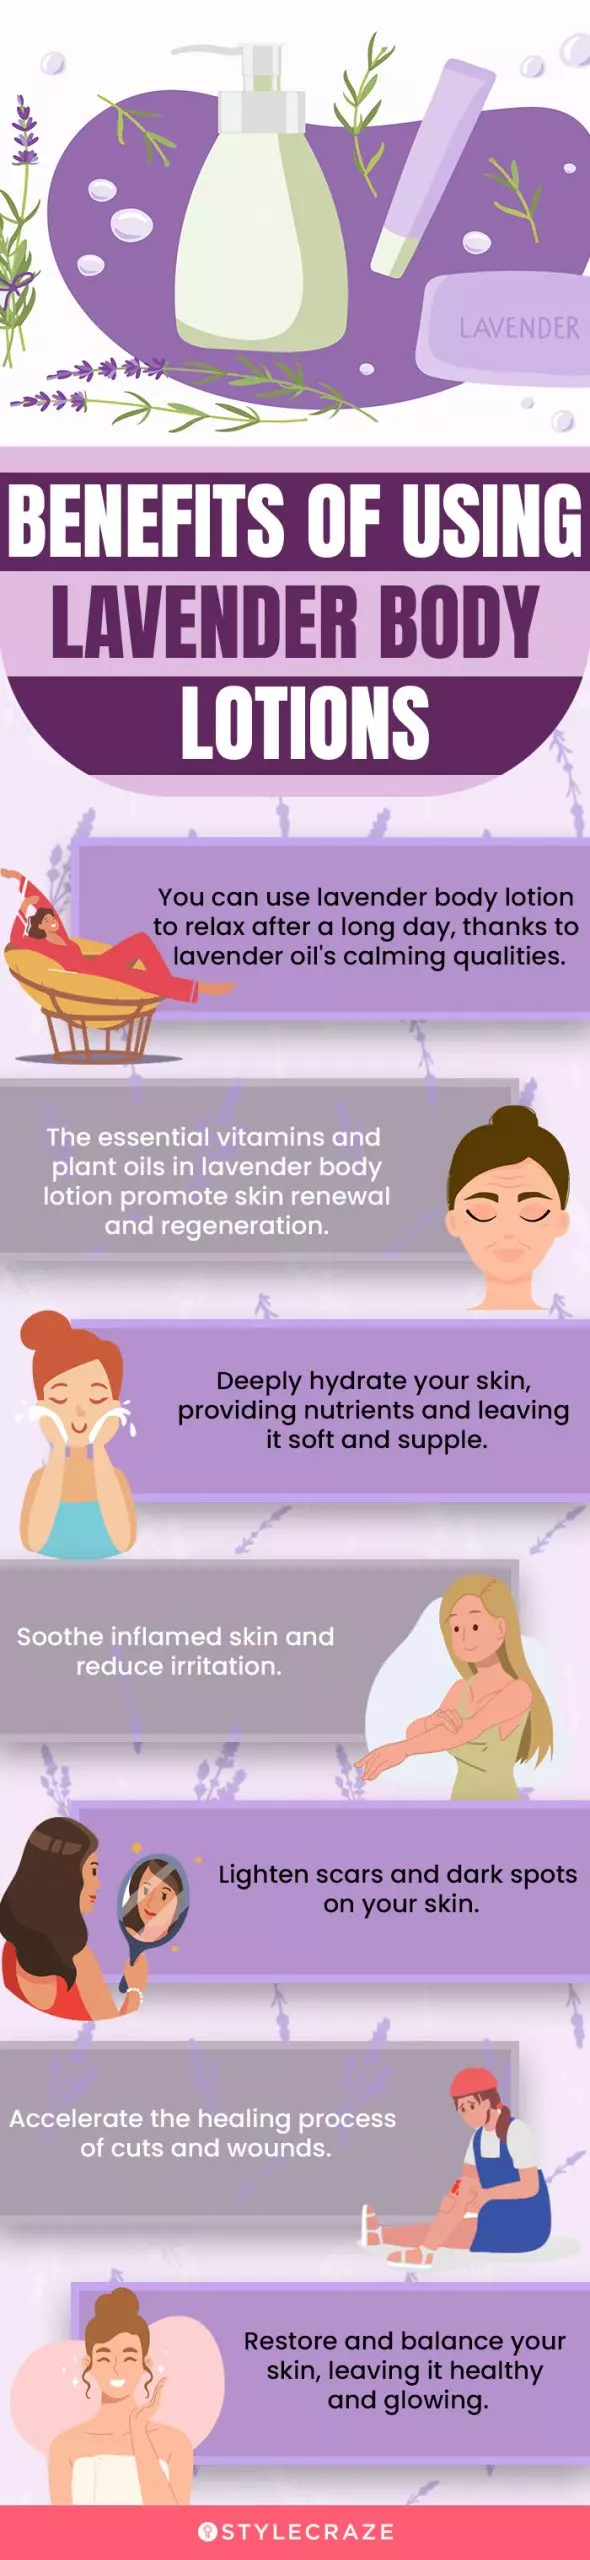 Benefits Of Using Lavender Body Lotions (infographic)